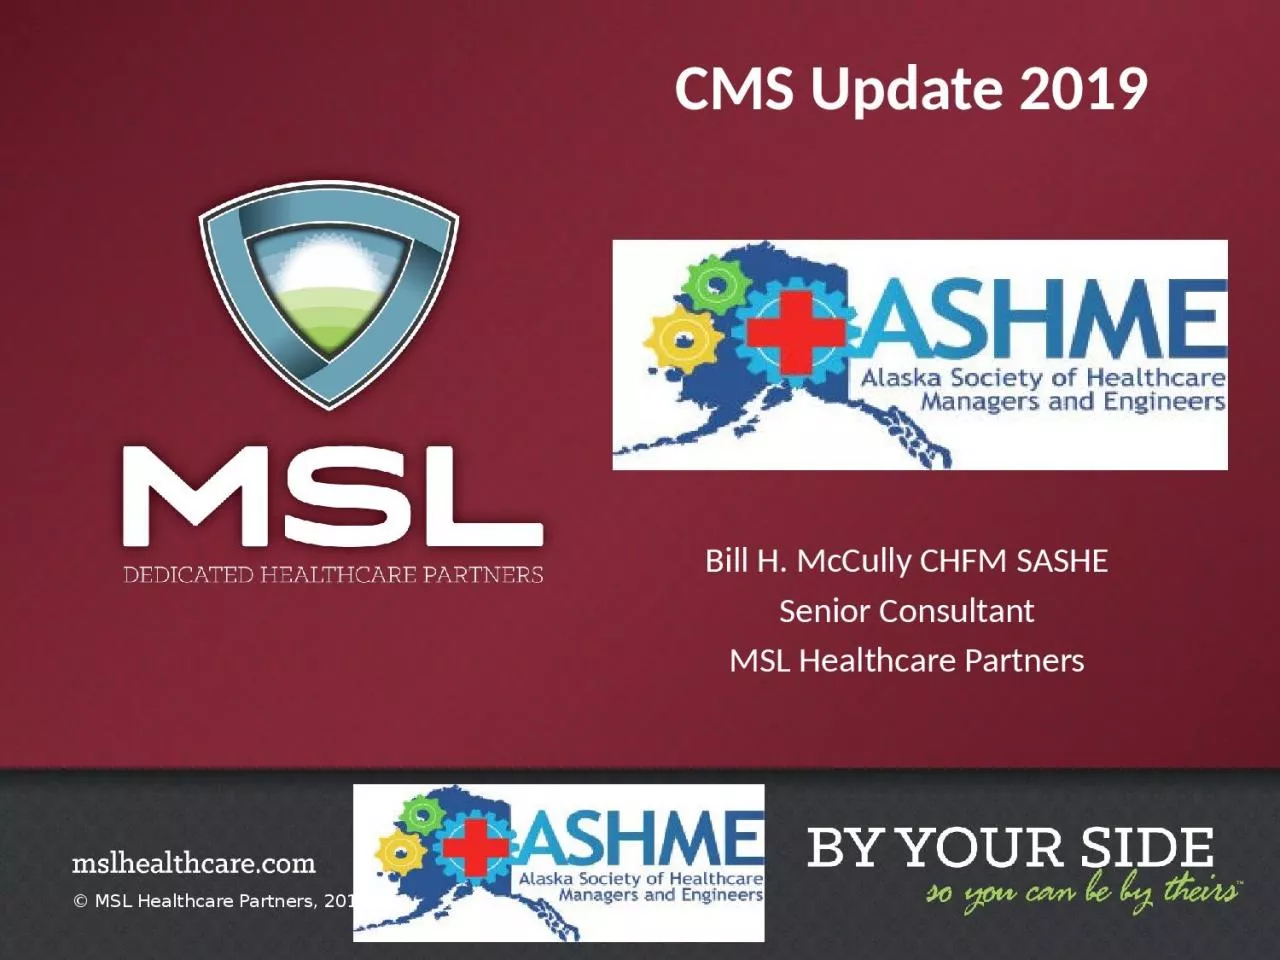 CMS Update 2019 Bill H. McCully CHFM SASHE